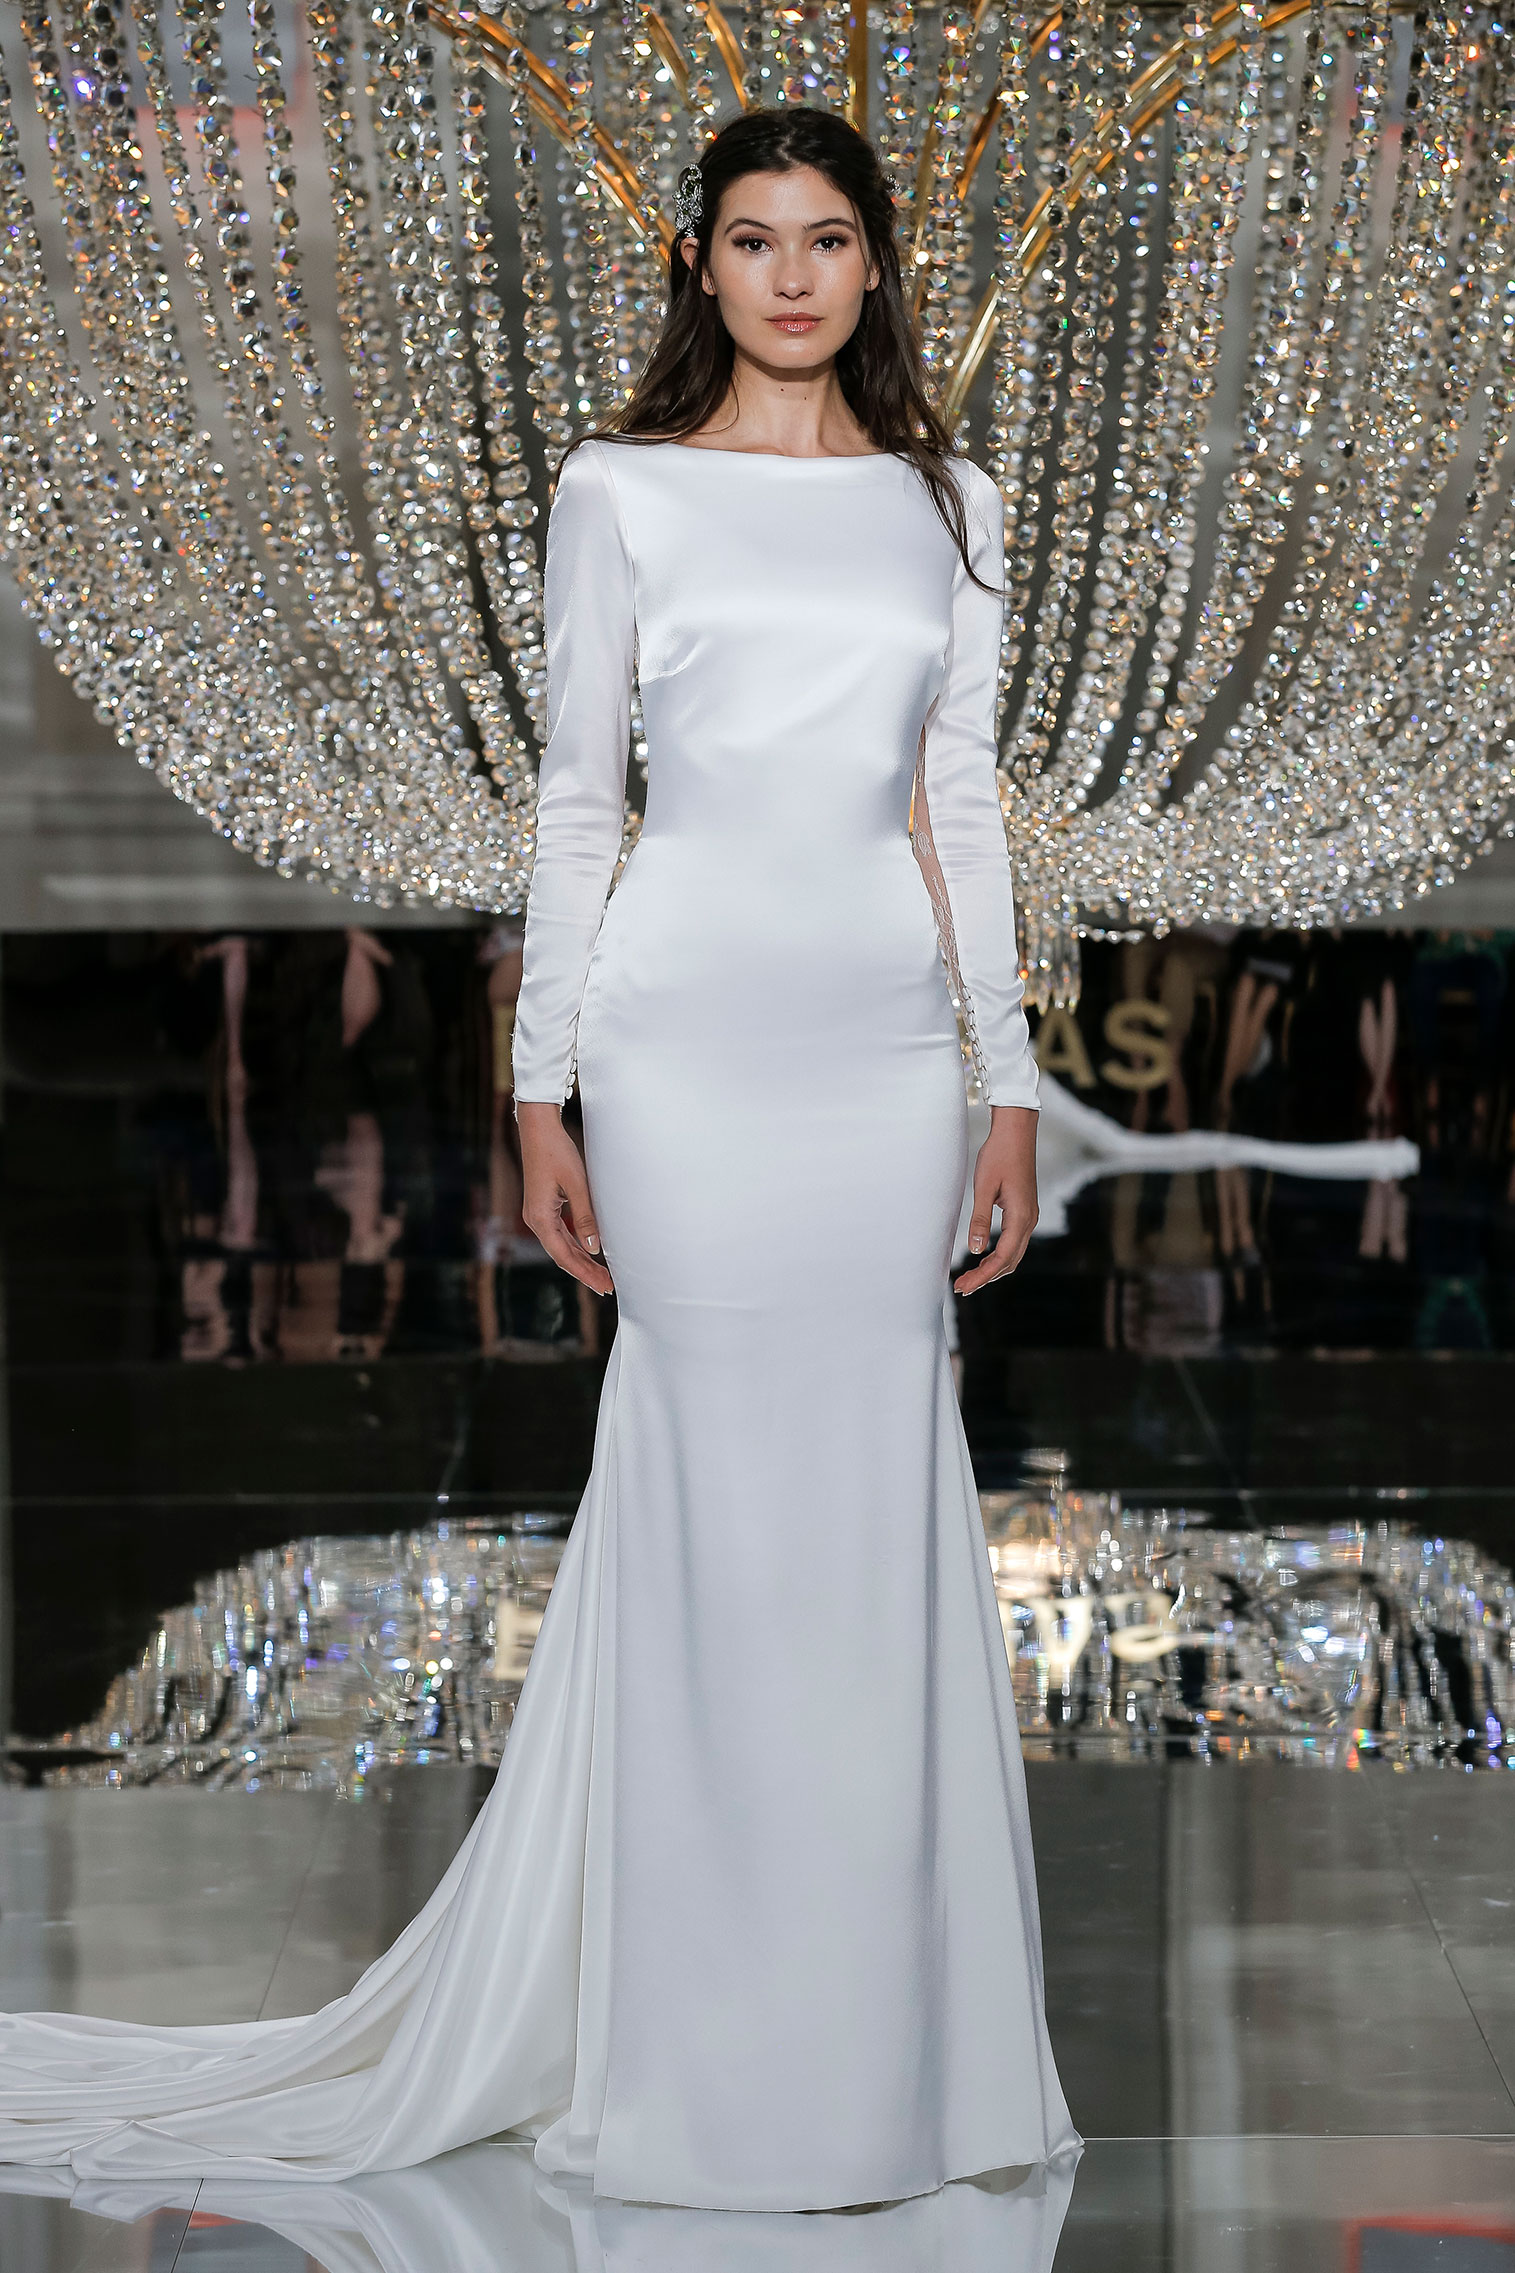 Royal wedding Gown inspiration by Pronovias